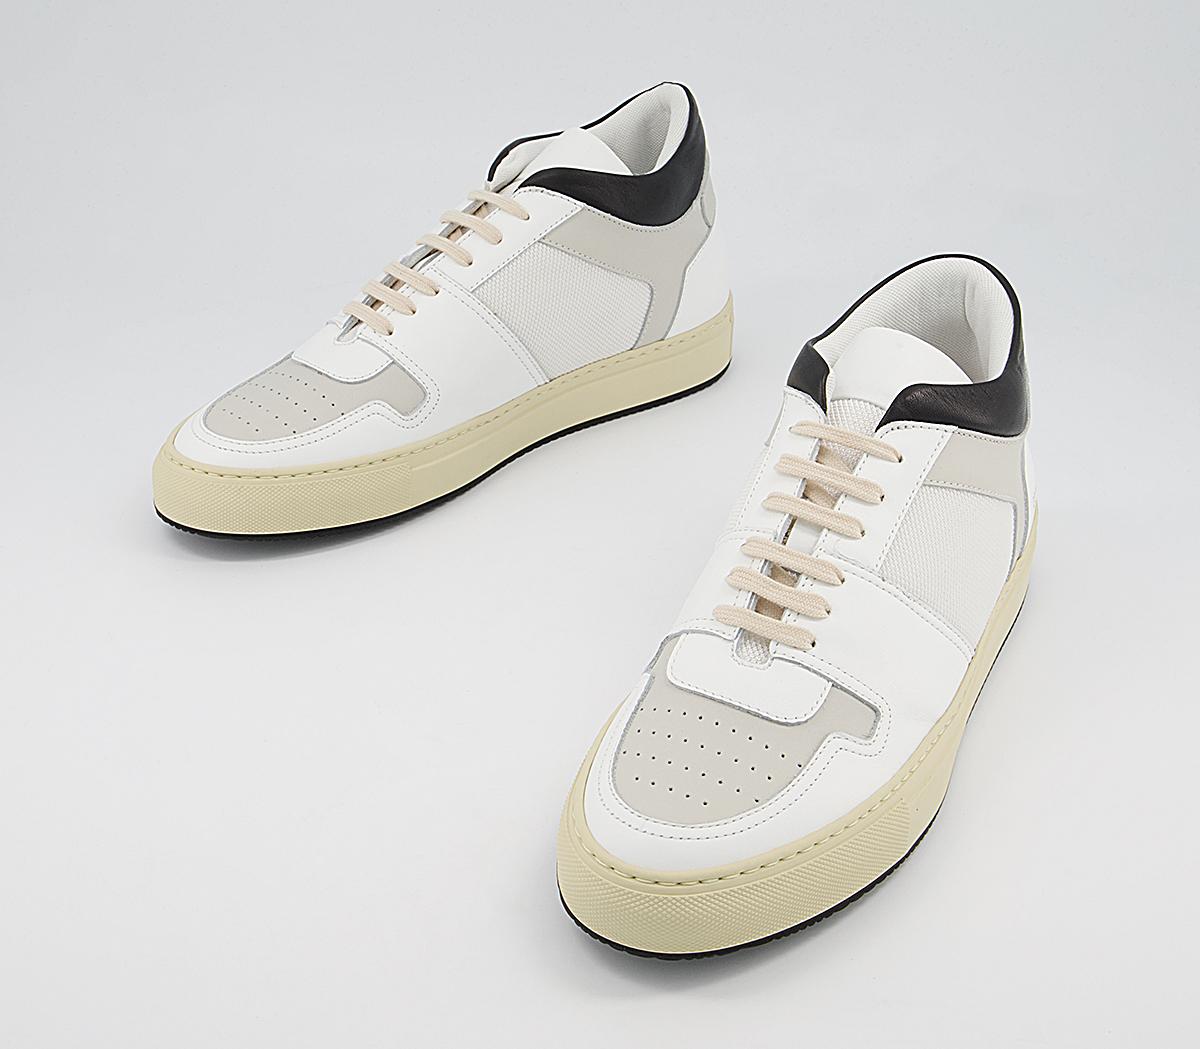 Common Projects Bball Low Decades Trainers White Black - His trainers